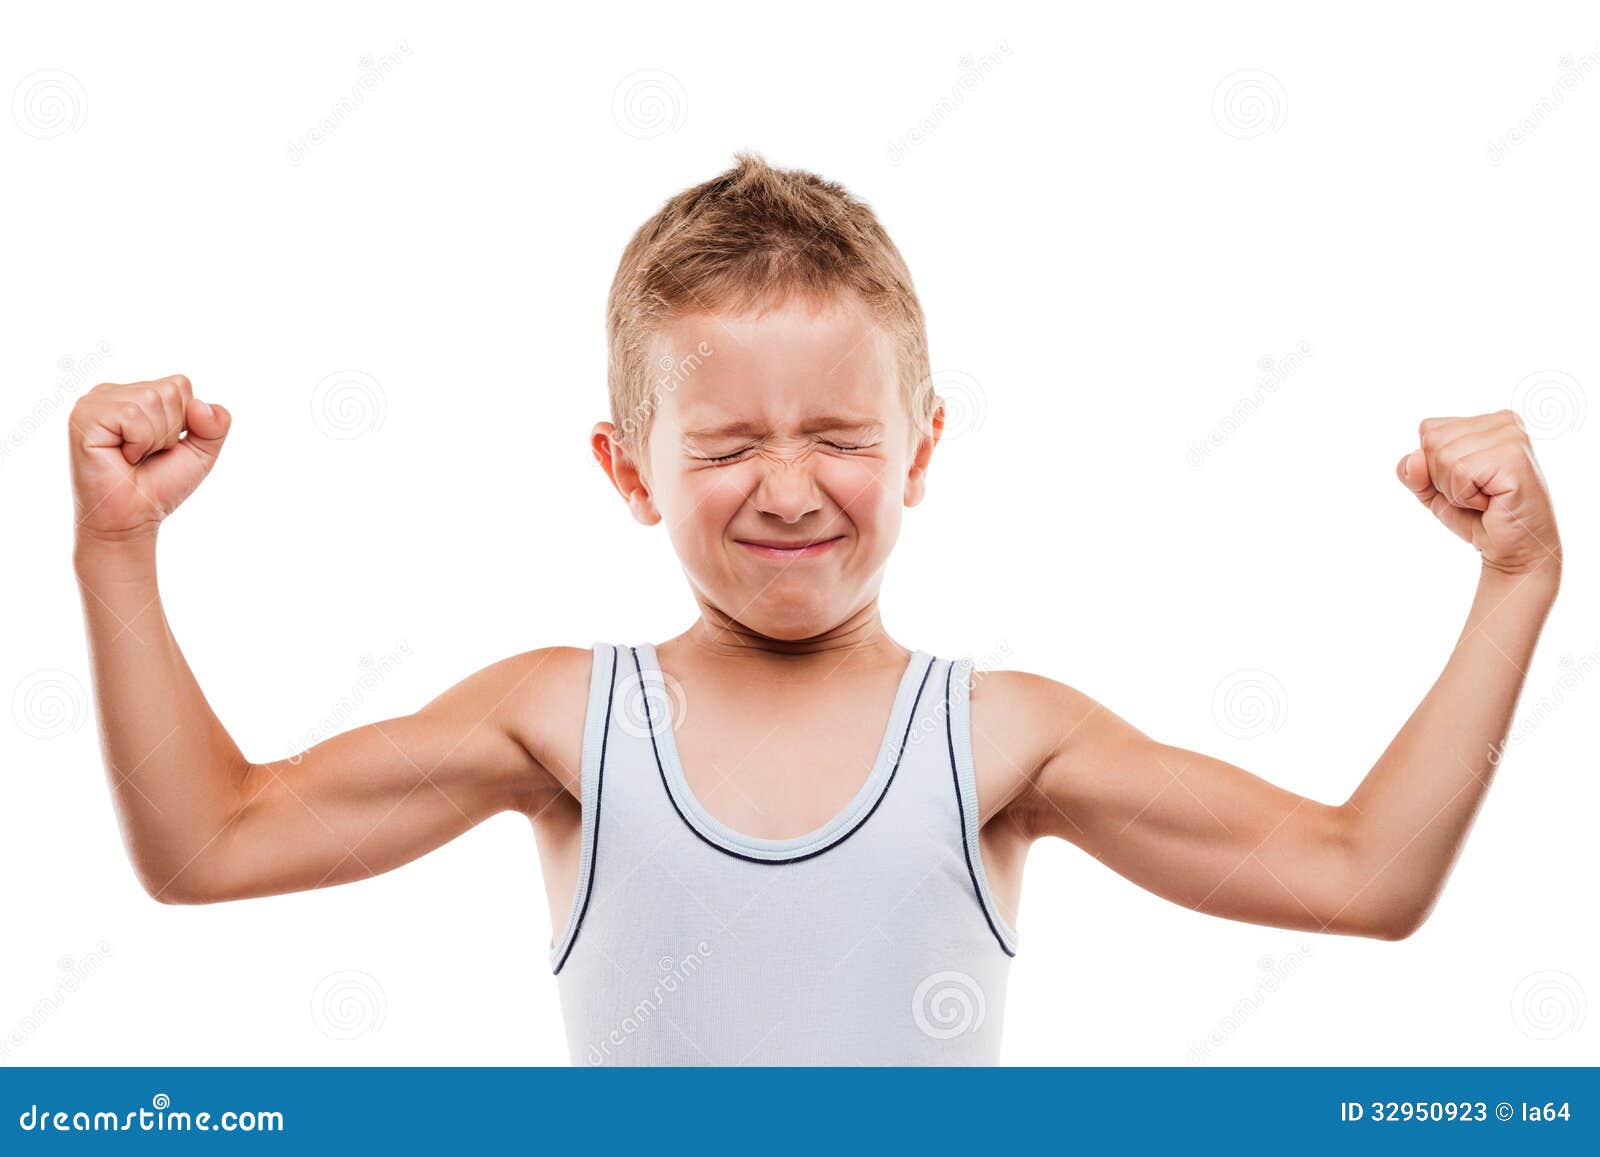 smiling sport child boy showing hand biceps muscles strength